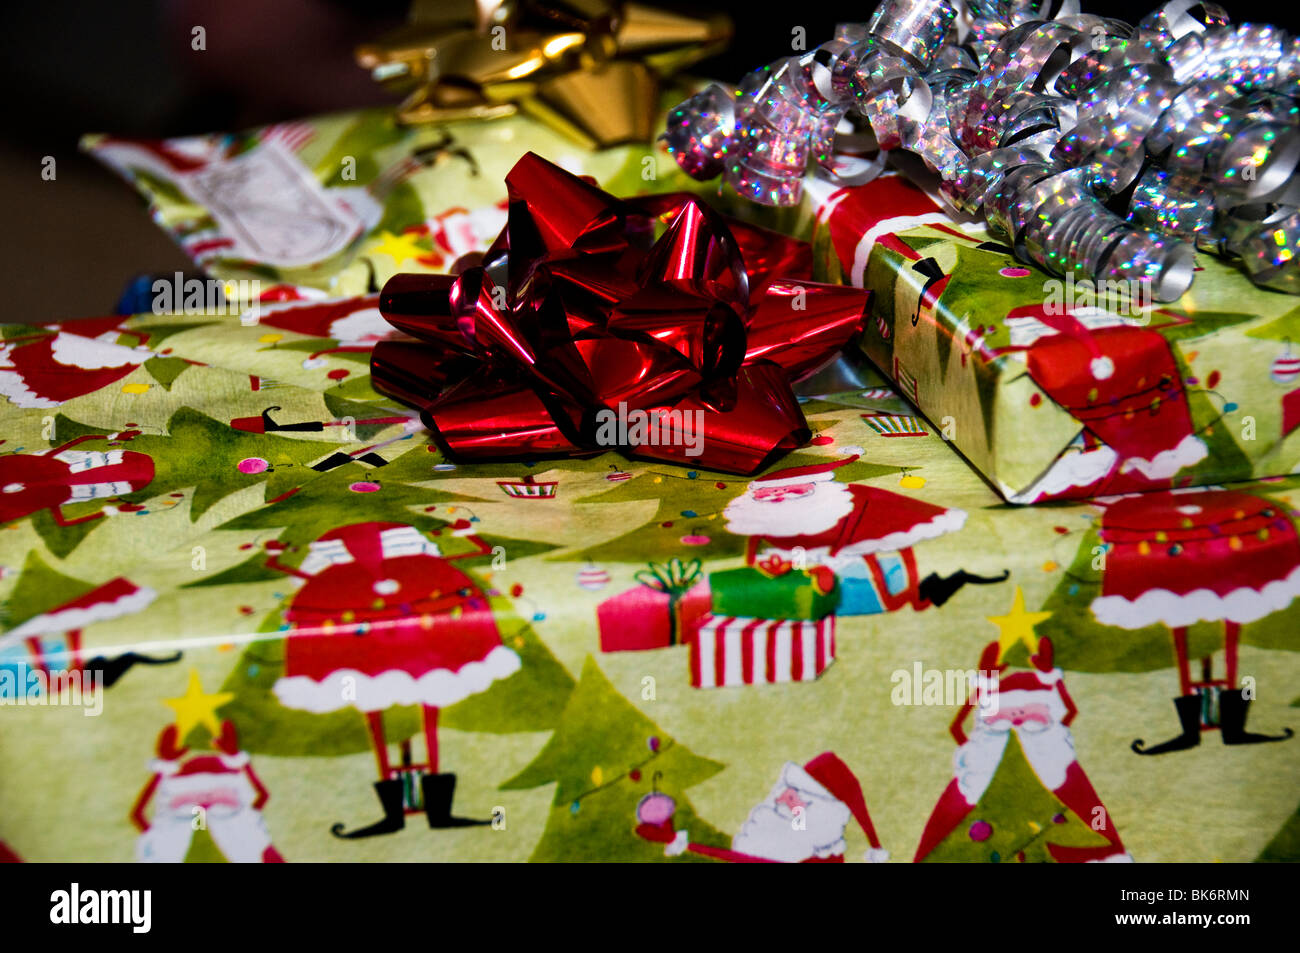 Christmas gifts, wrapped and with ribbons and bows. Closeup. Stock Photo